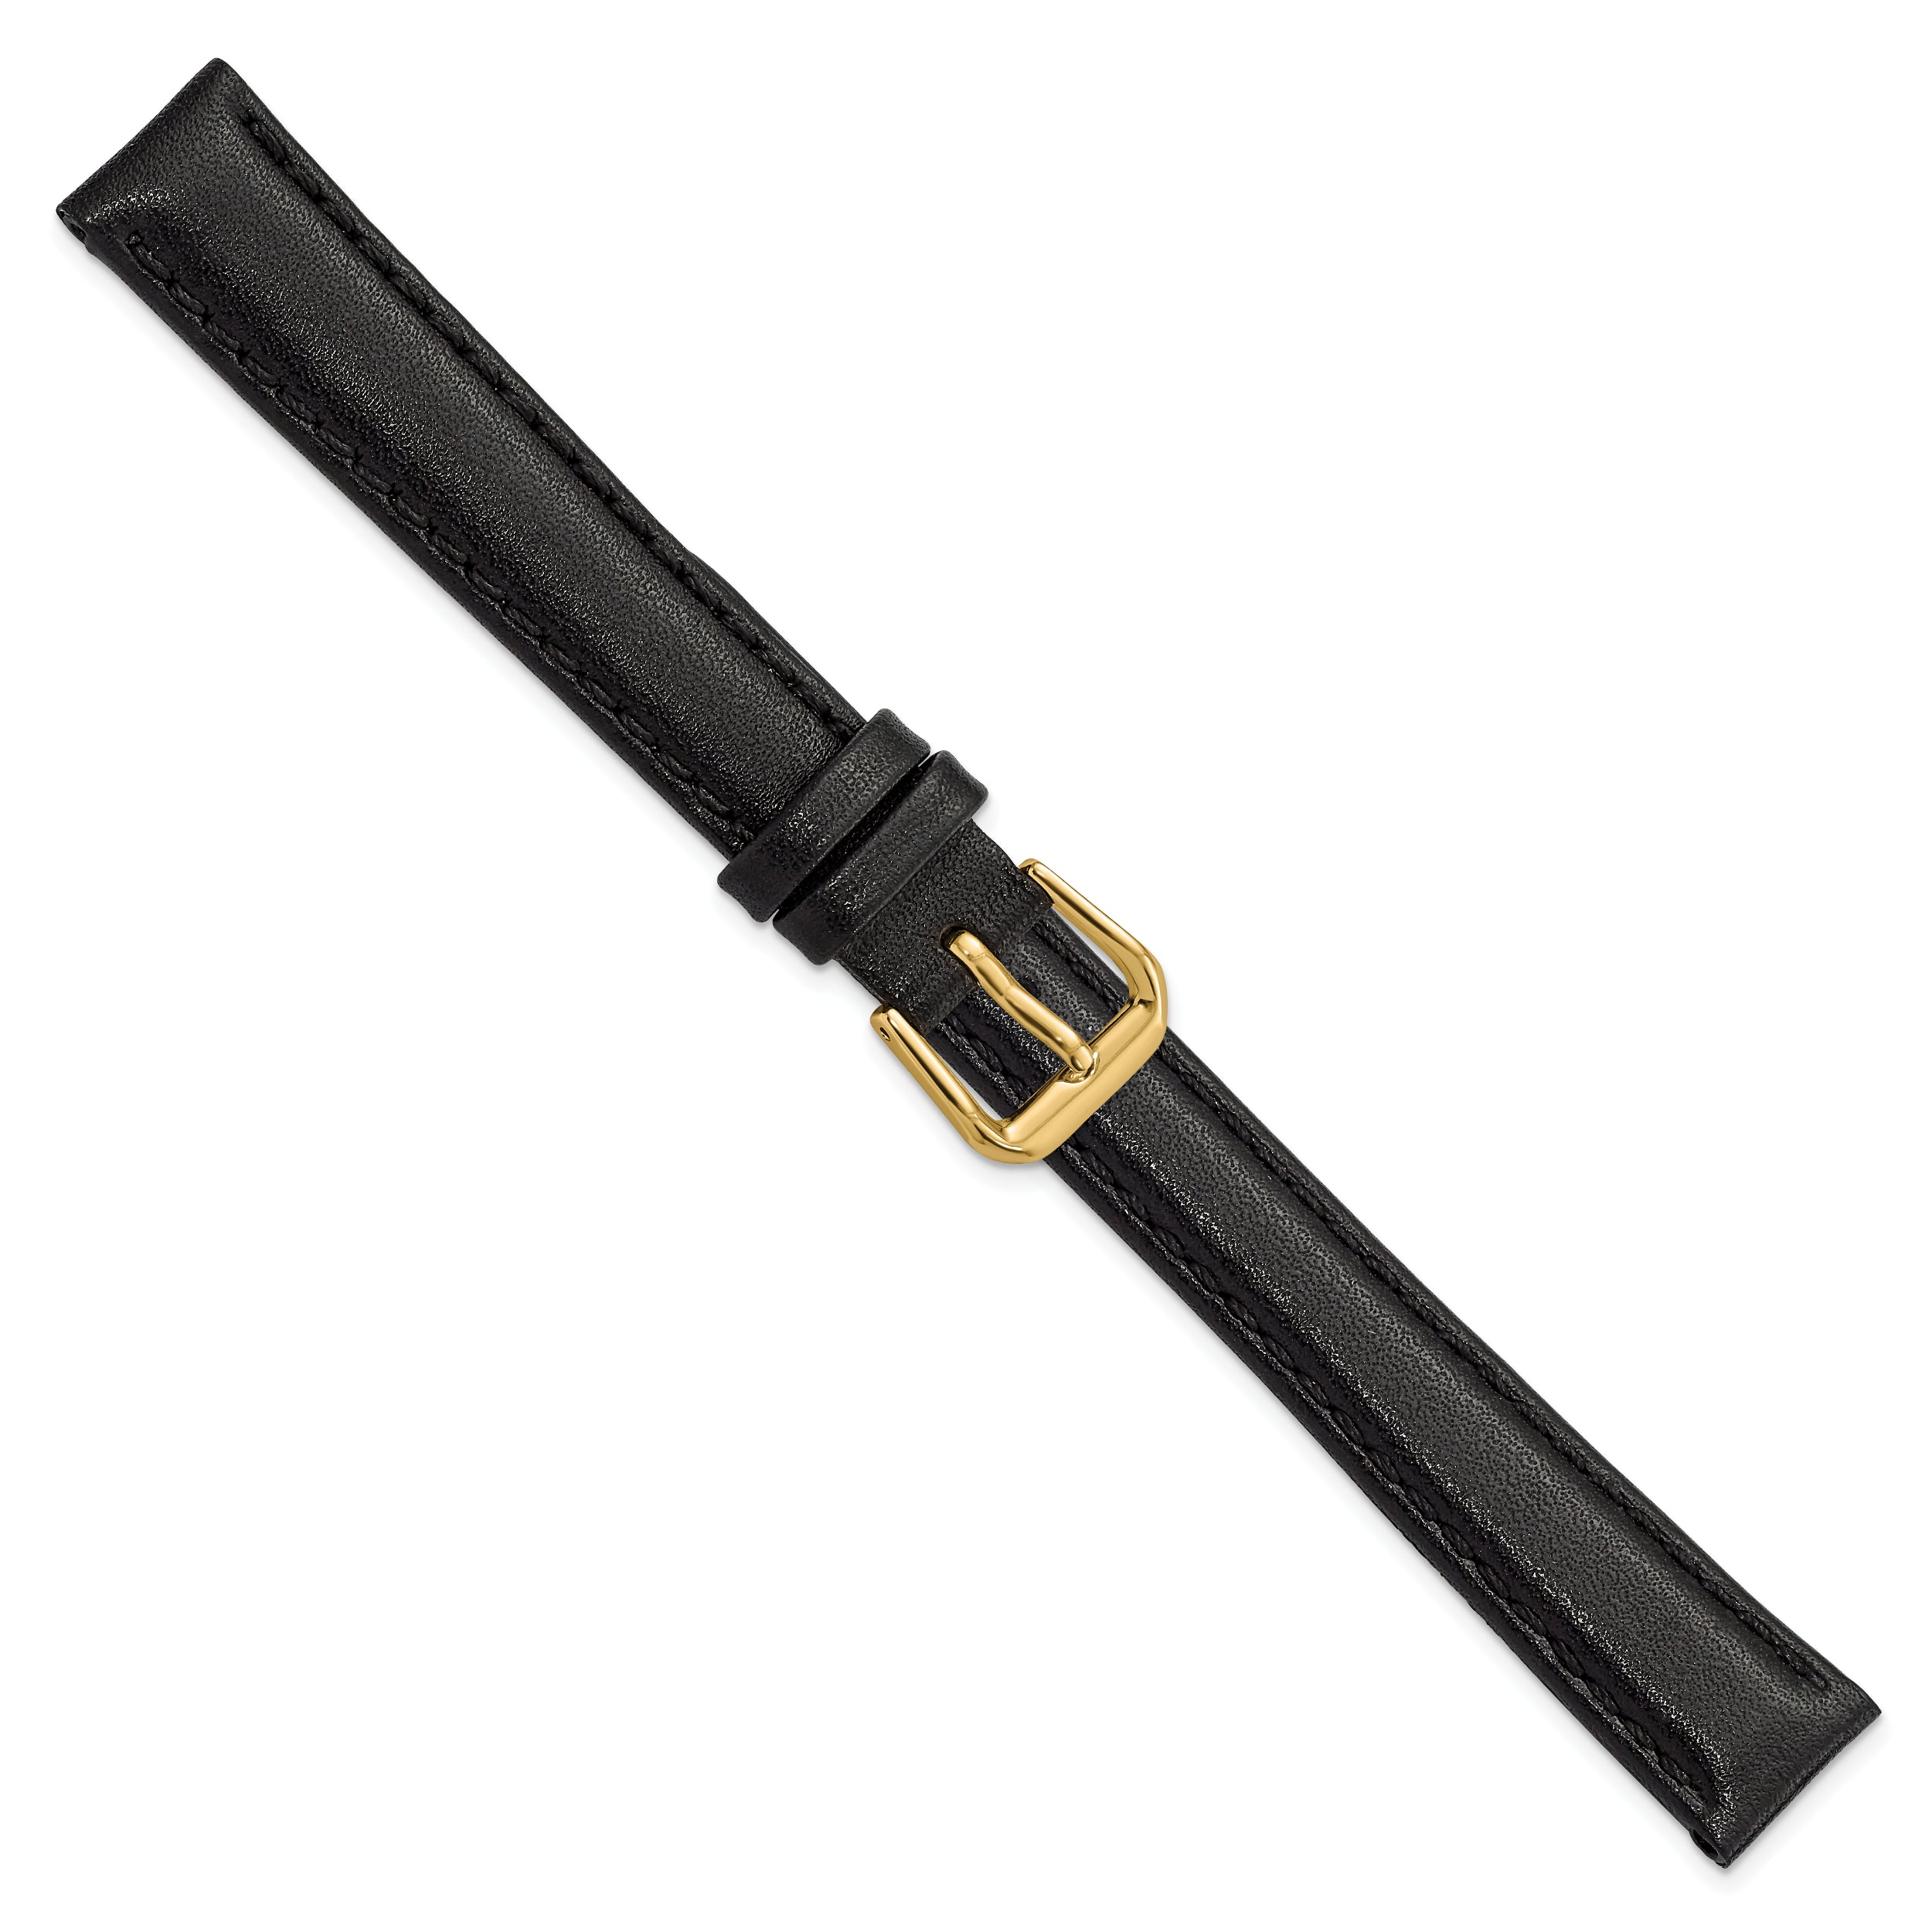 12mm Black Long Smooth Leather with Gold-tone Buckle 7.5 inch Watch Band